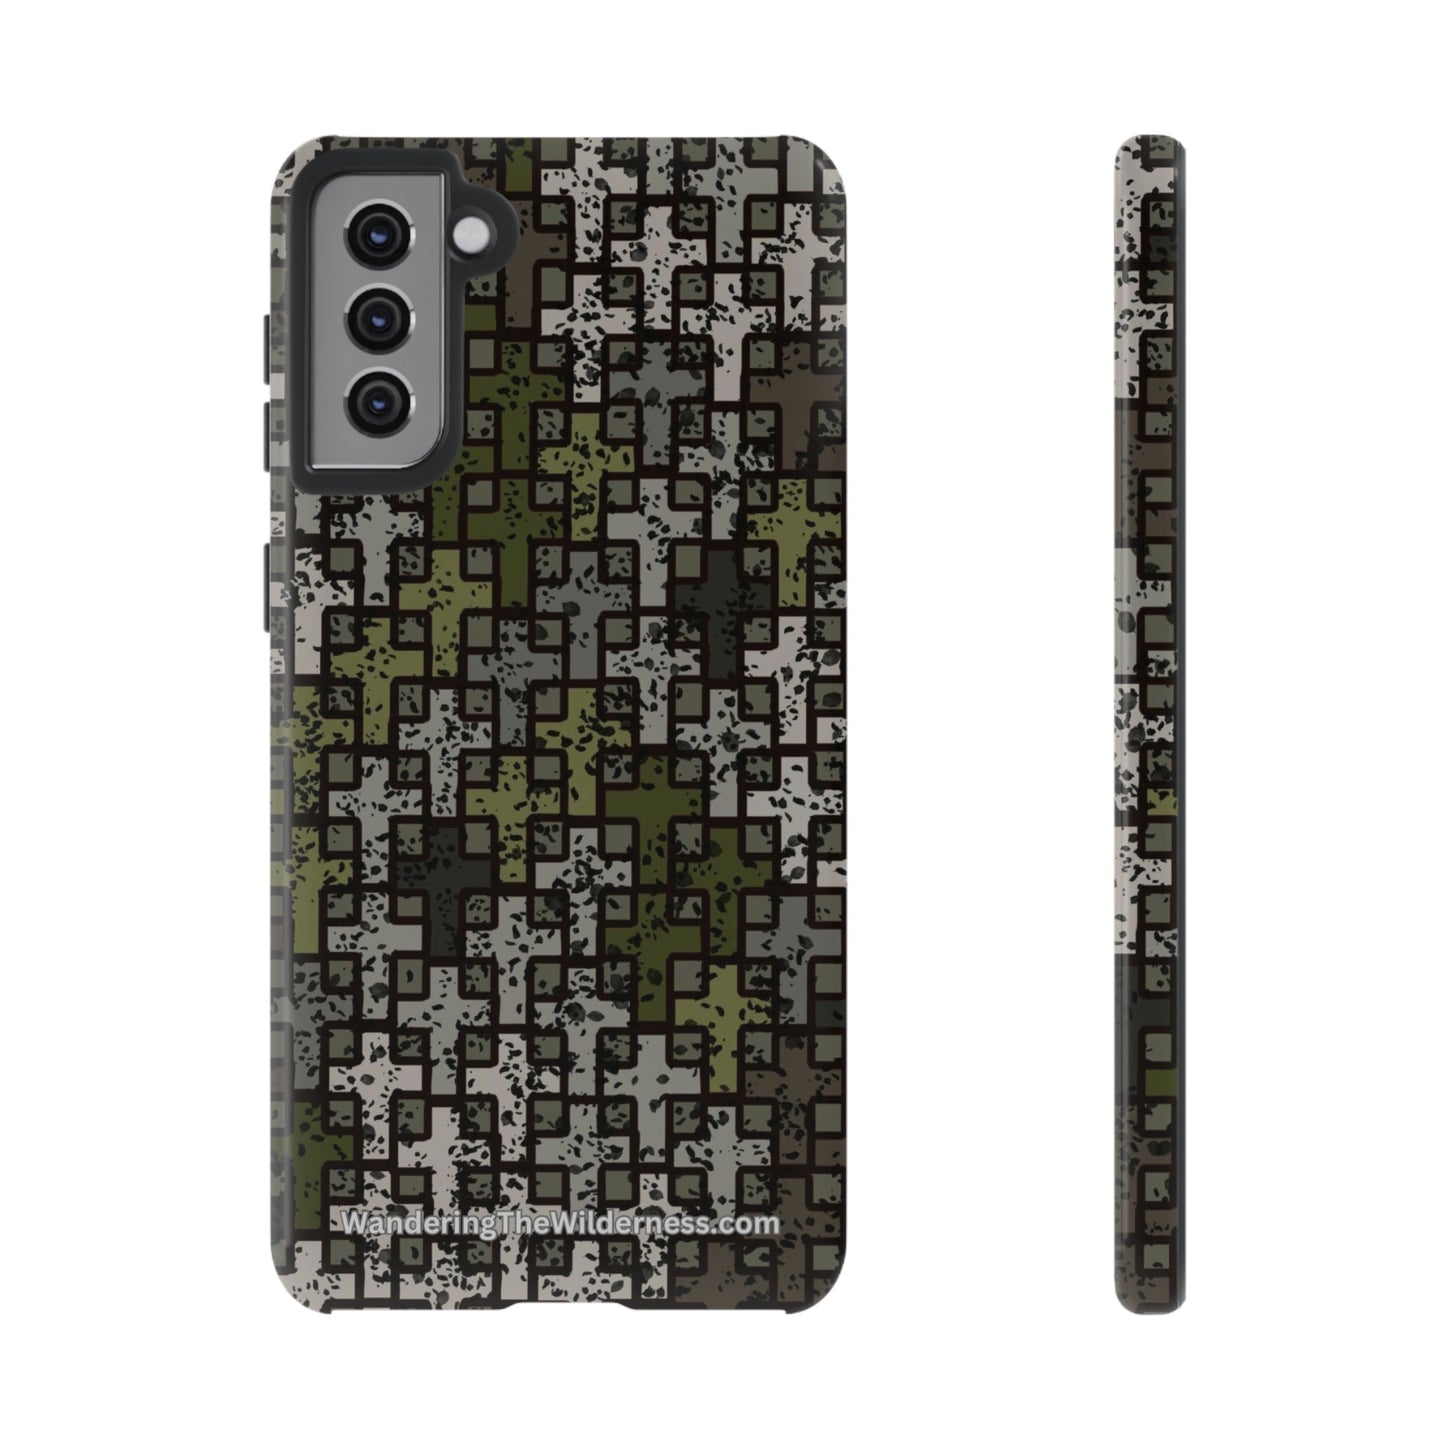 Wandering the Wilderness Rockslide Camo Tough Cases